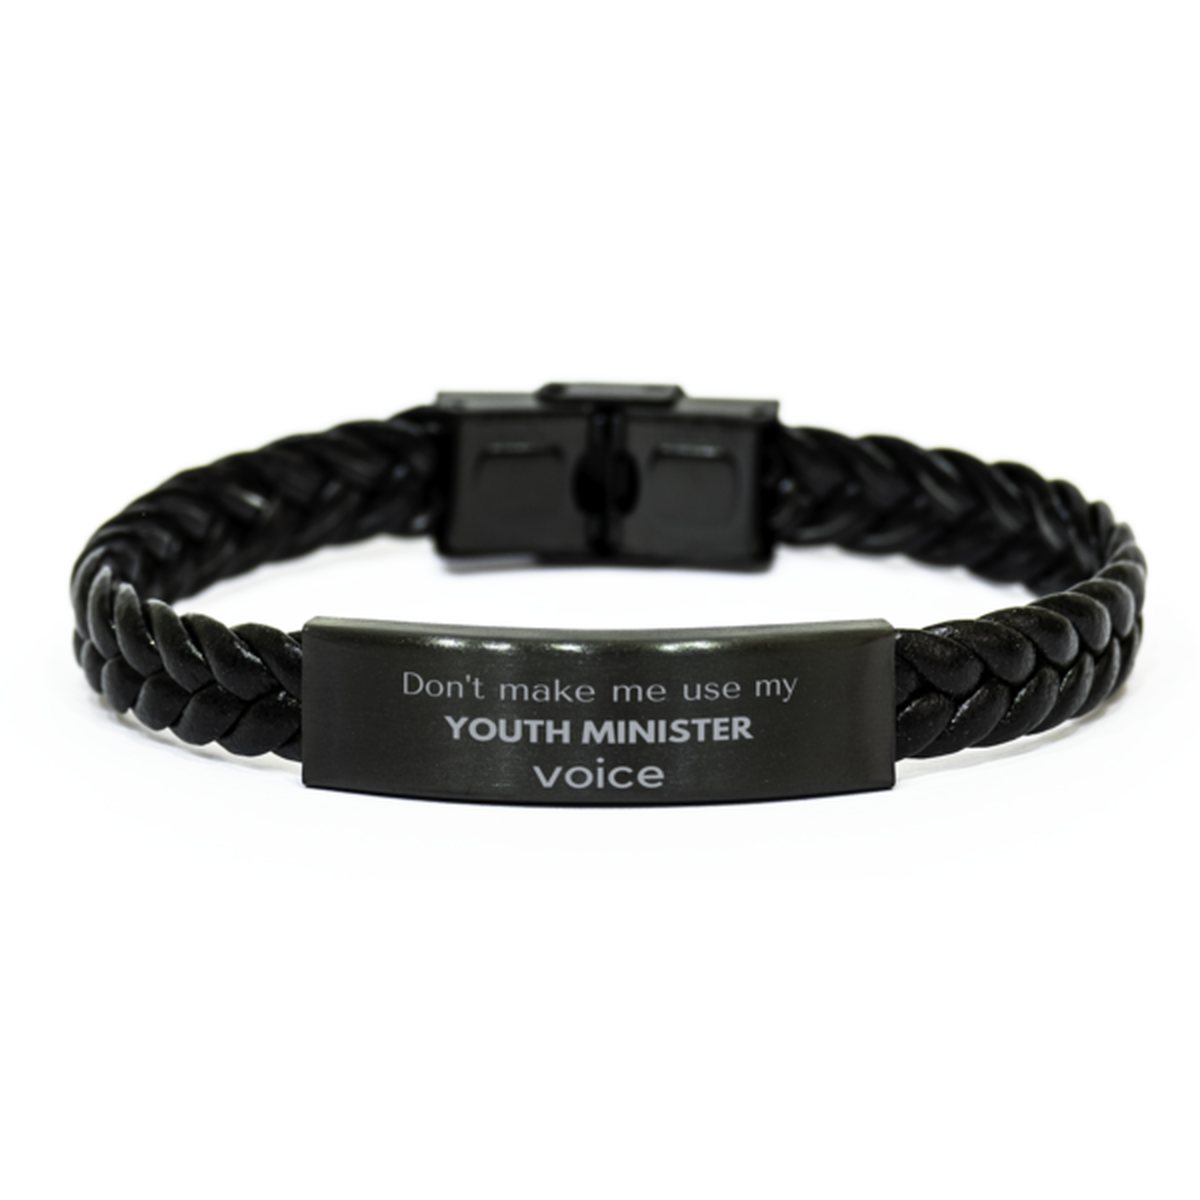 Don't make me use my Youth Minister voice, Sarcasm Youth Minister Gifts, Christmas Youth Minister Braided Leather Bracelet Birthday Unique Gifts For Youth Minister Coworkers, Men, Women, Colleague, Friends